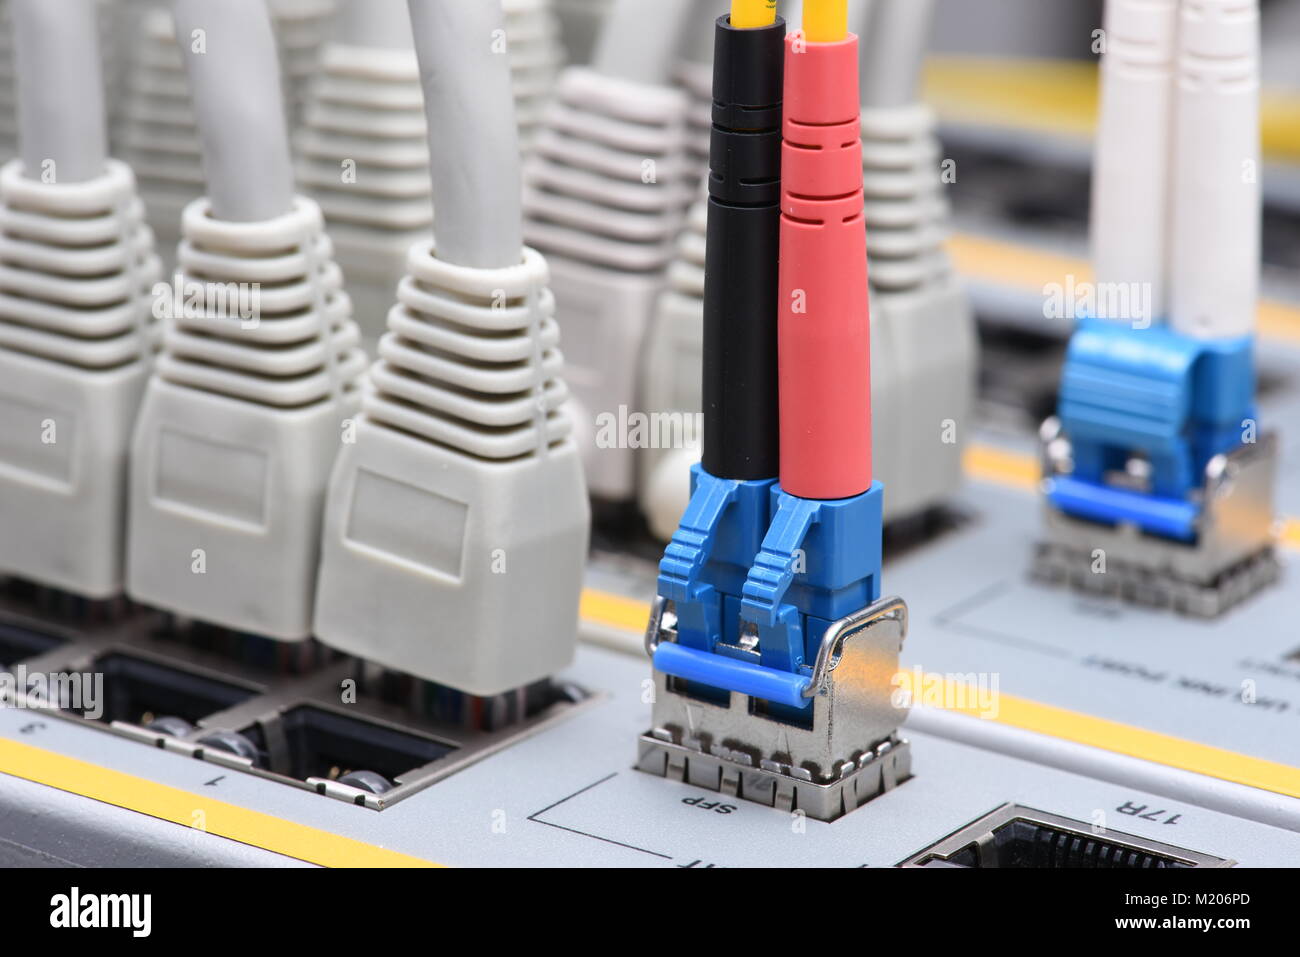 Optic fiber and network cables connected to switch in data center, internet network technology Stock Photo